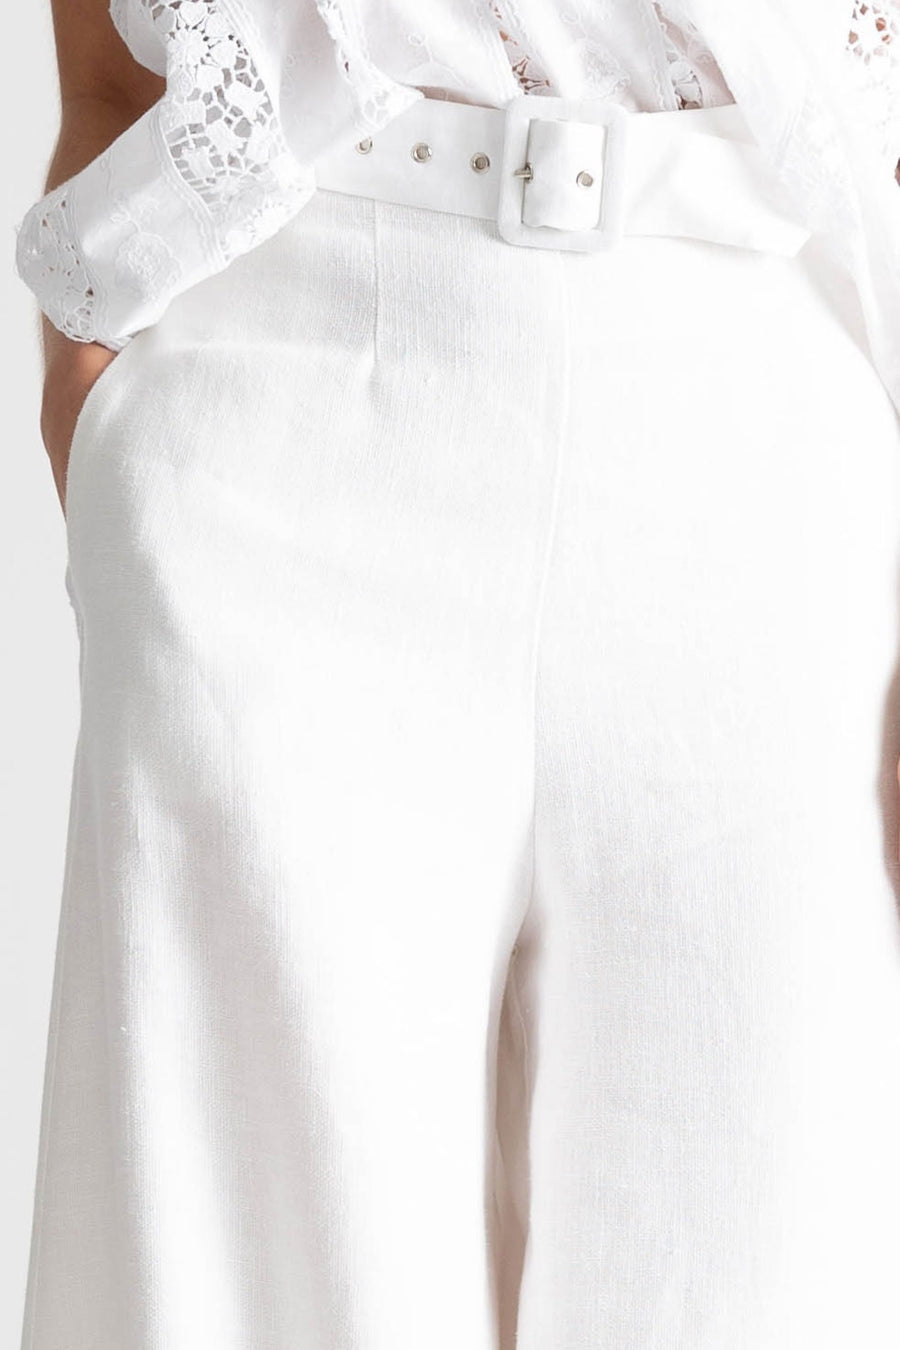 This is a detail photo of high waisted white linen pants with an attached belt and side seam pockets. 